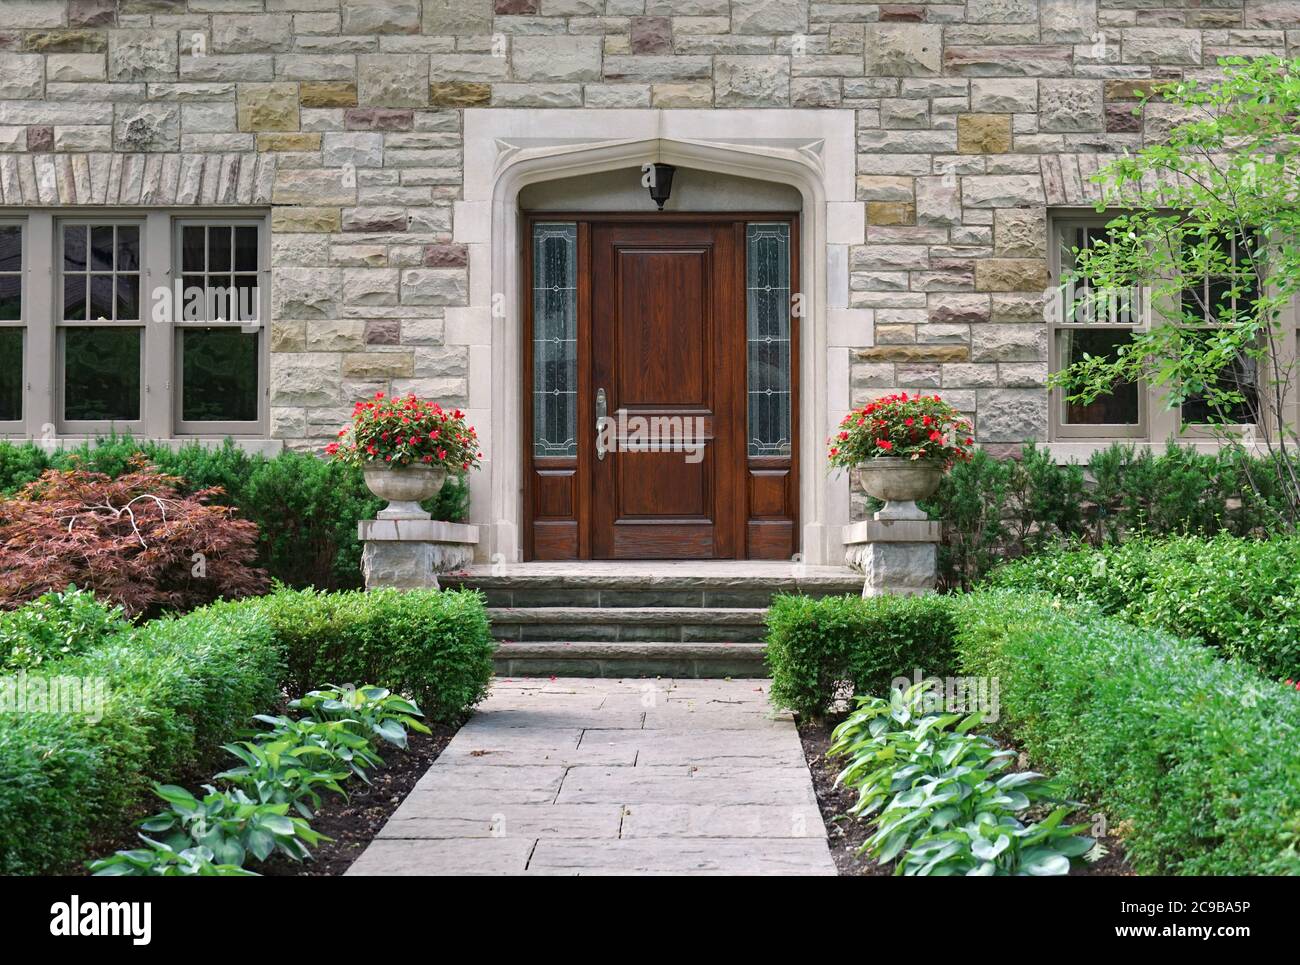 Stone faced house with shrubbery and elegant wooden front door with sidelights Stock Photo